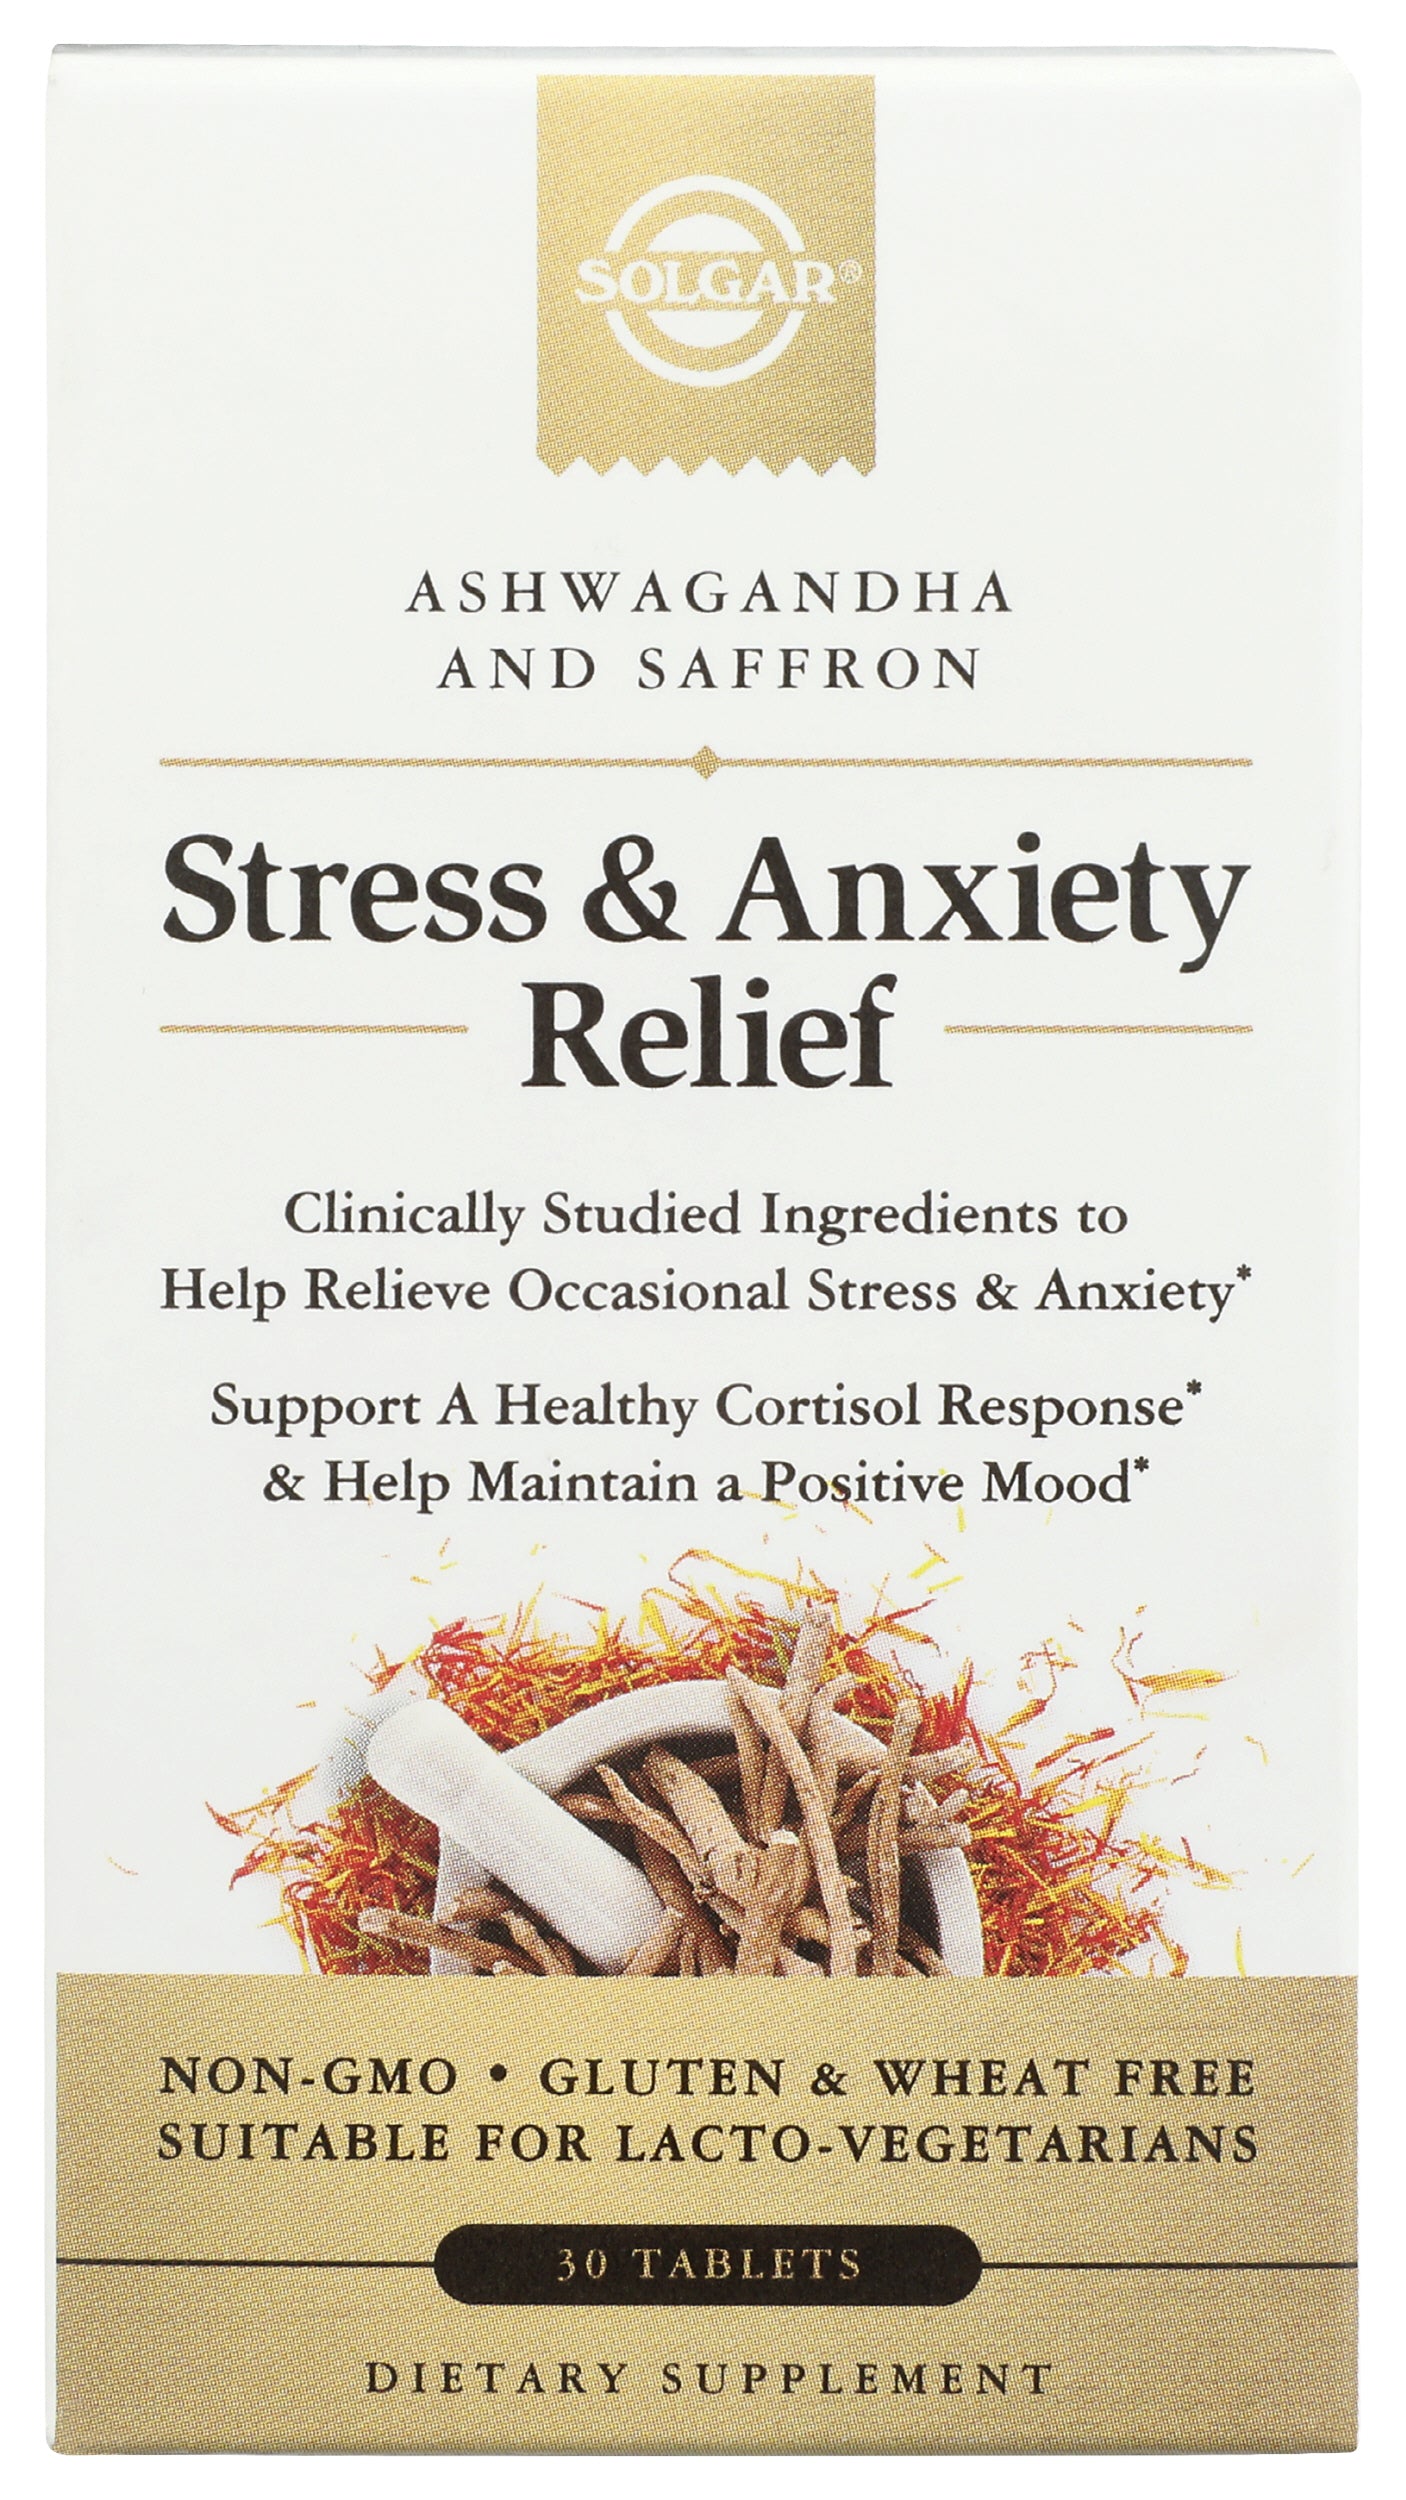 Solgar Stress & Anxiety Relief 30 Tablets Front of Box